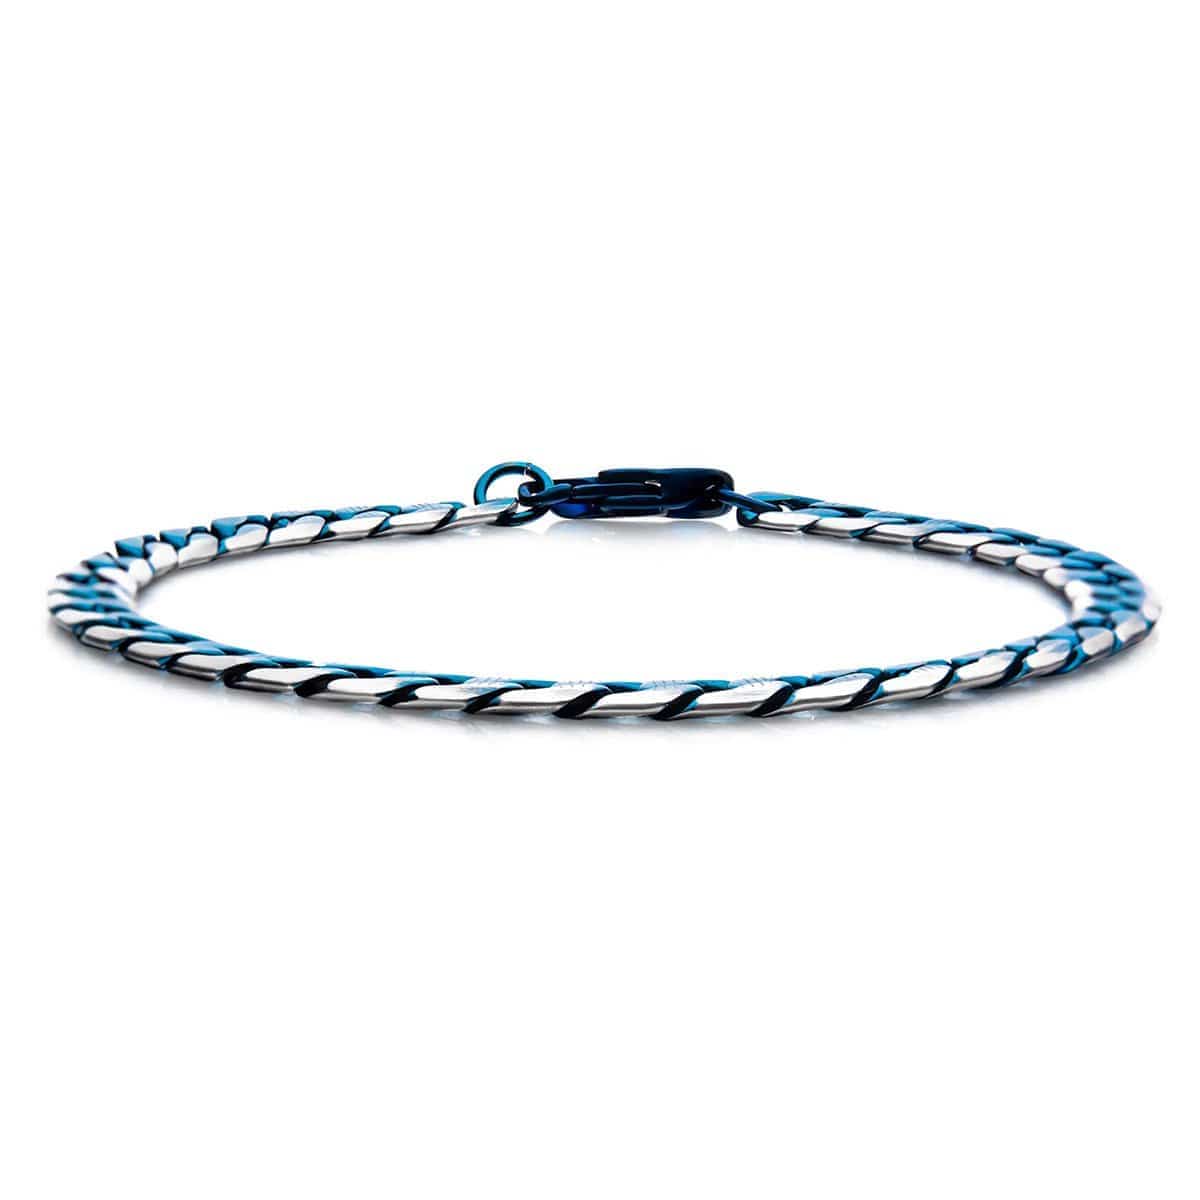 INOX JEWELRY Bracelets Blue and Silver Tone Stainless Steel 6mm Curb Cuban Chain Bracelet BR27851BL